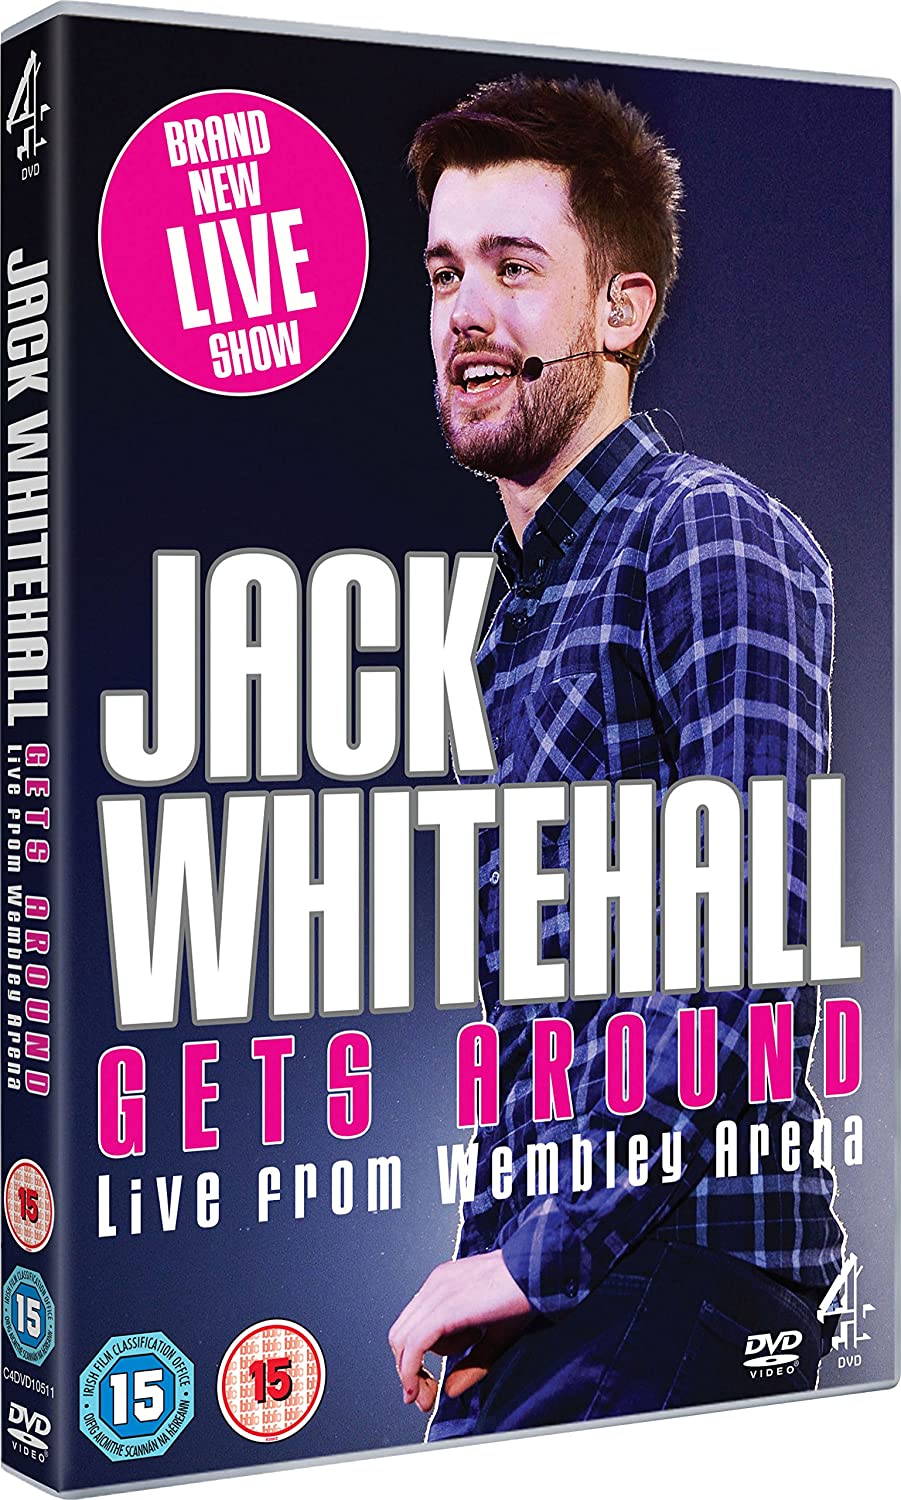 Jack Whitehall Gets Around: Live from Wembley Arena -Comedy [DVD]